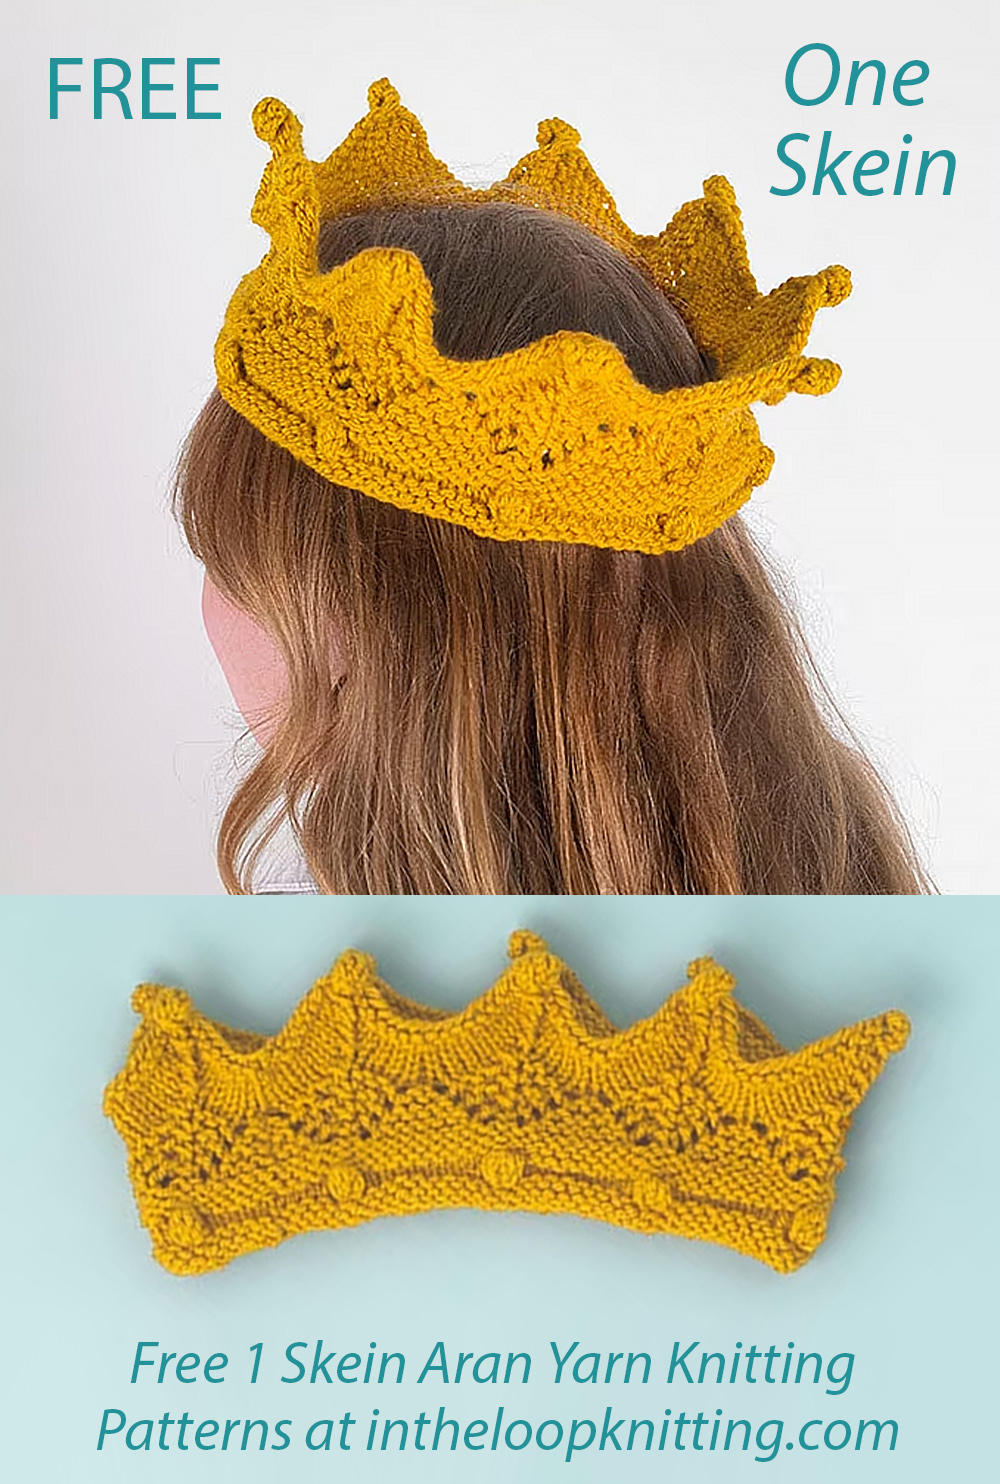 Free One Skein Party Crown Knitting Pattern